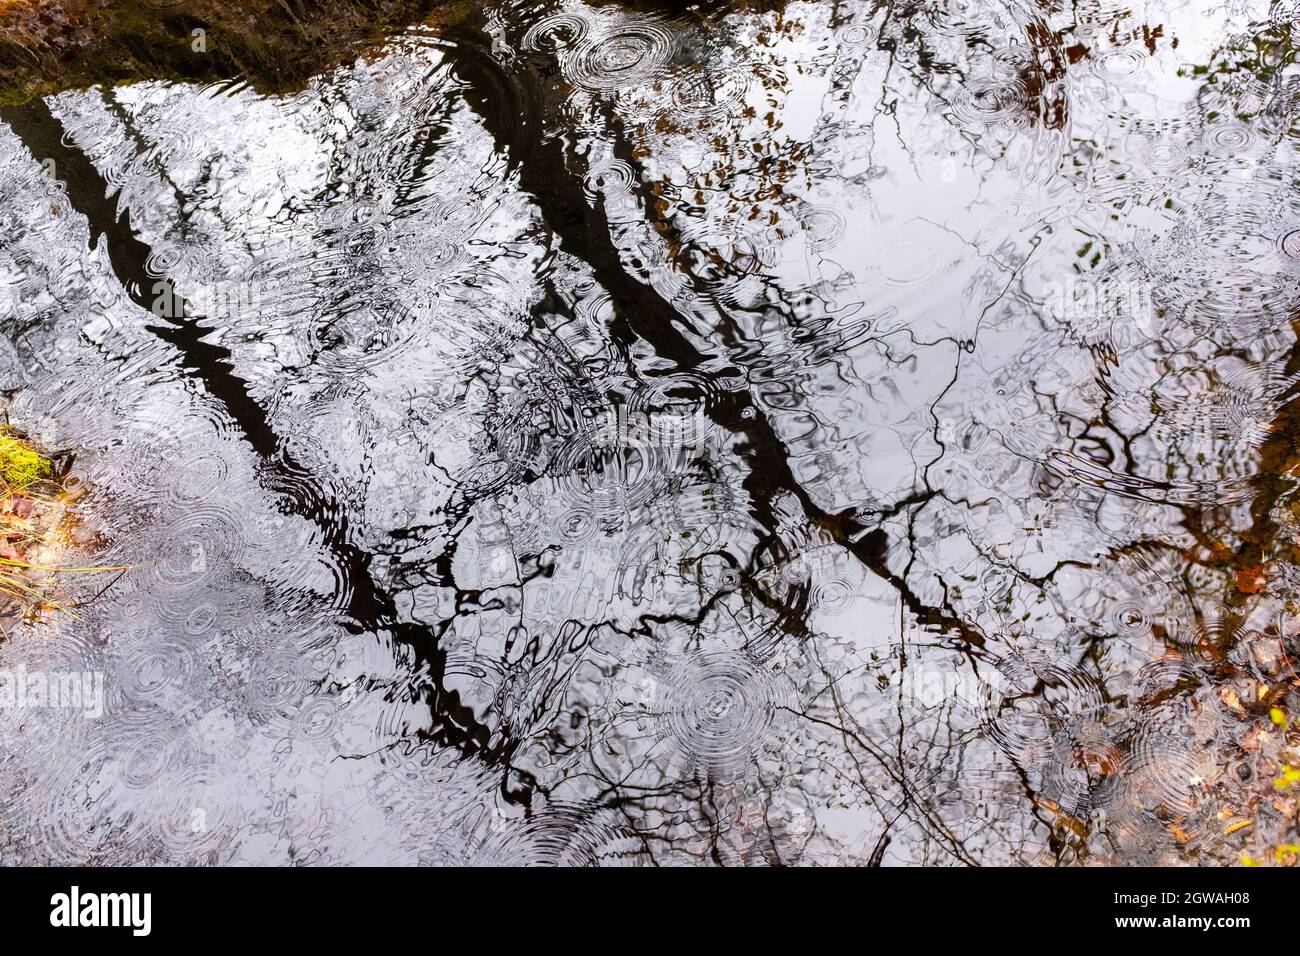 Raindrops falling on a dark pond with tree silhouettes, taken on a late winter overcast day in the Fontainebleau forest, France Stock Photo